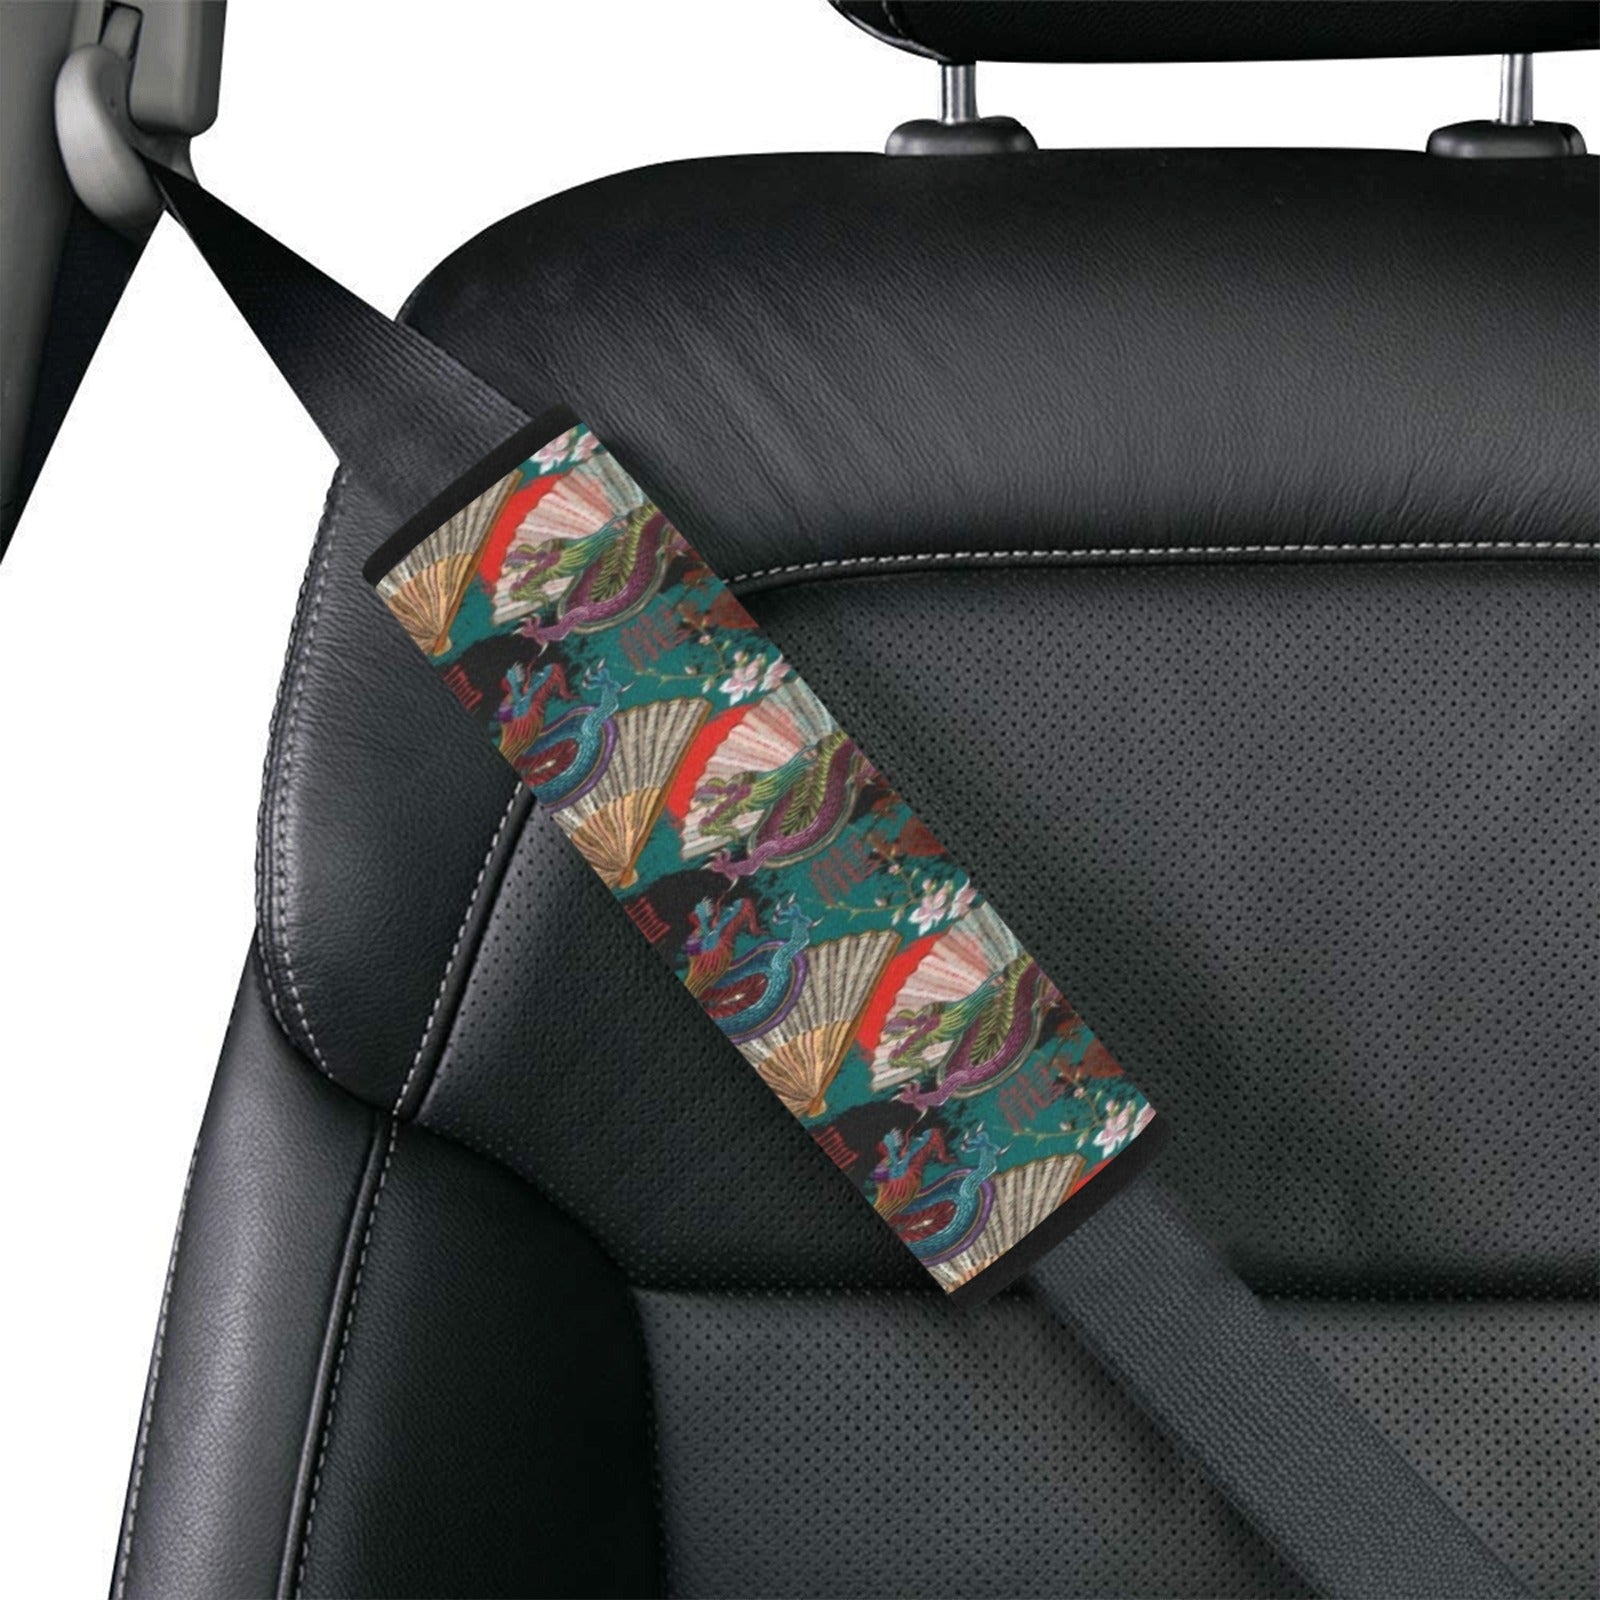 Dragons and Fans Car Seat Belt Cover 7" x 12.6"